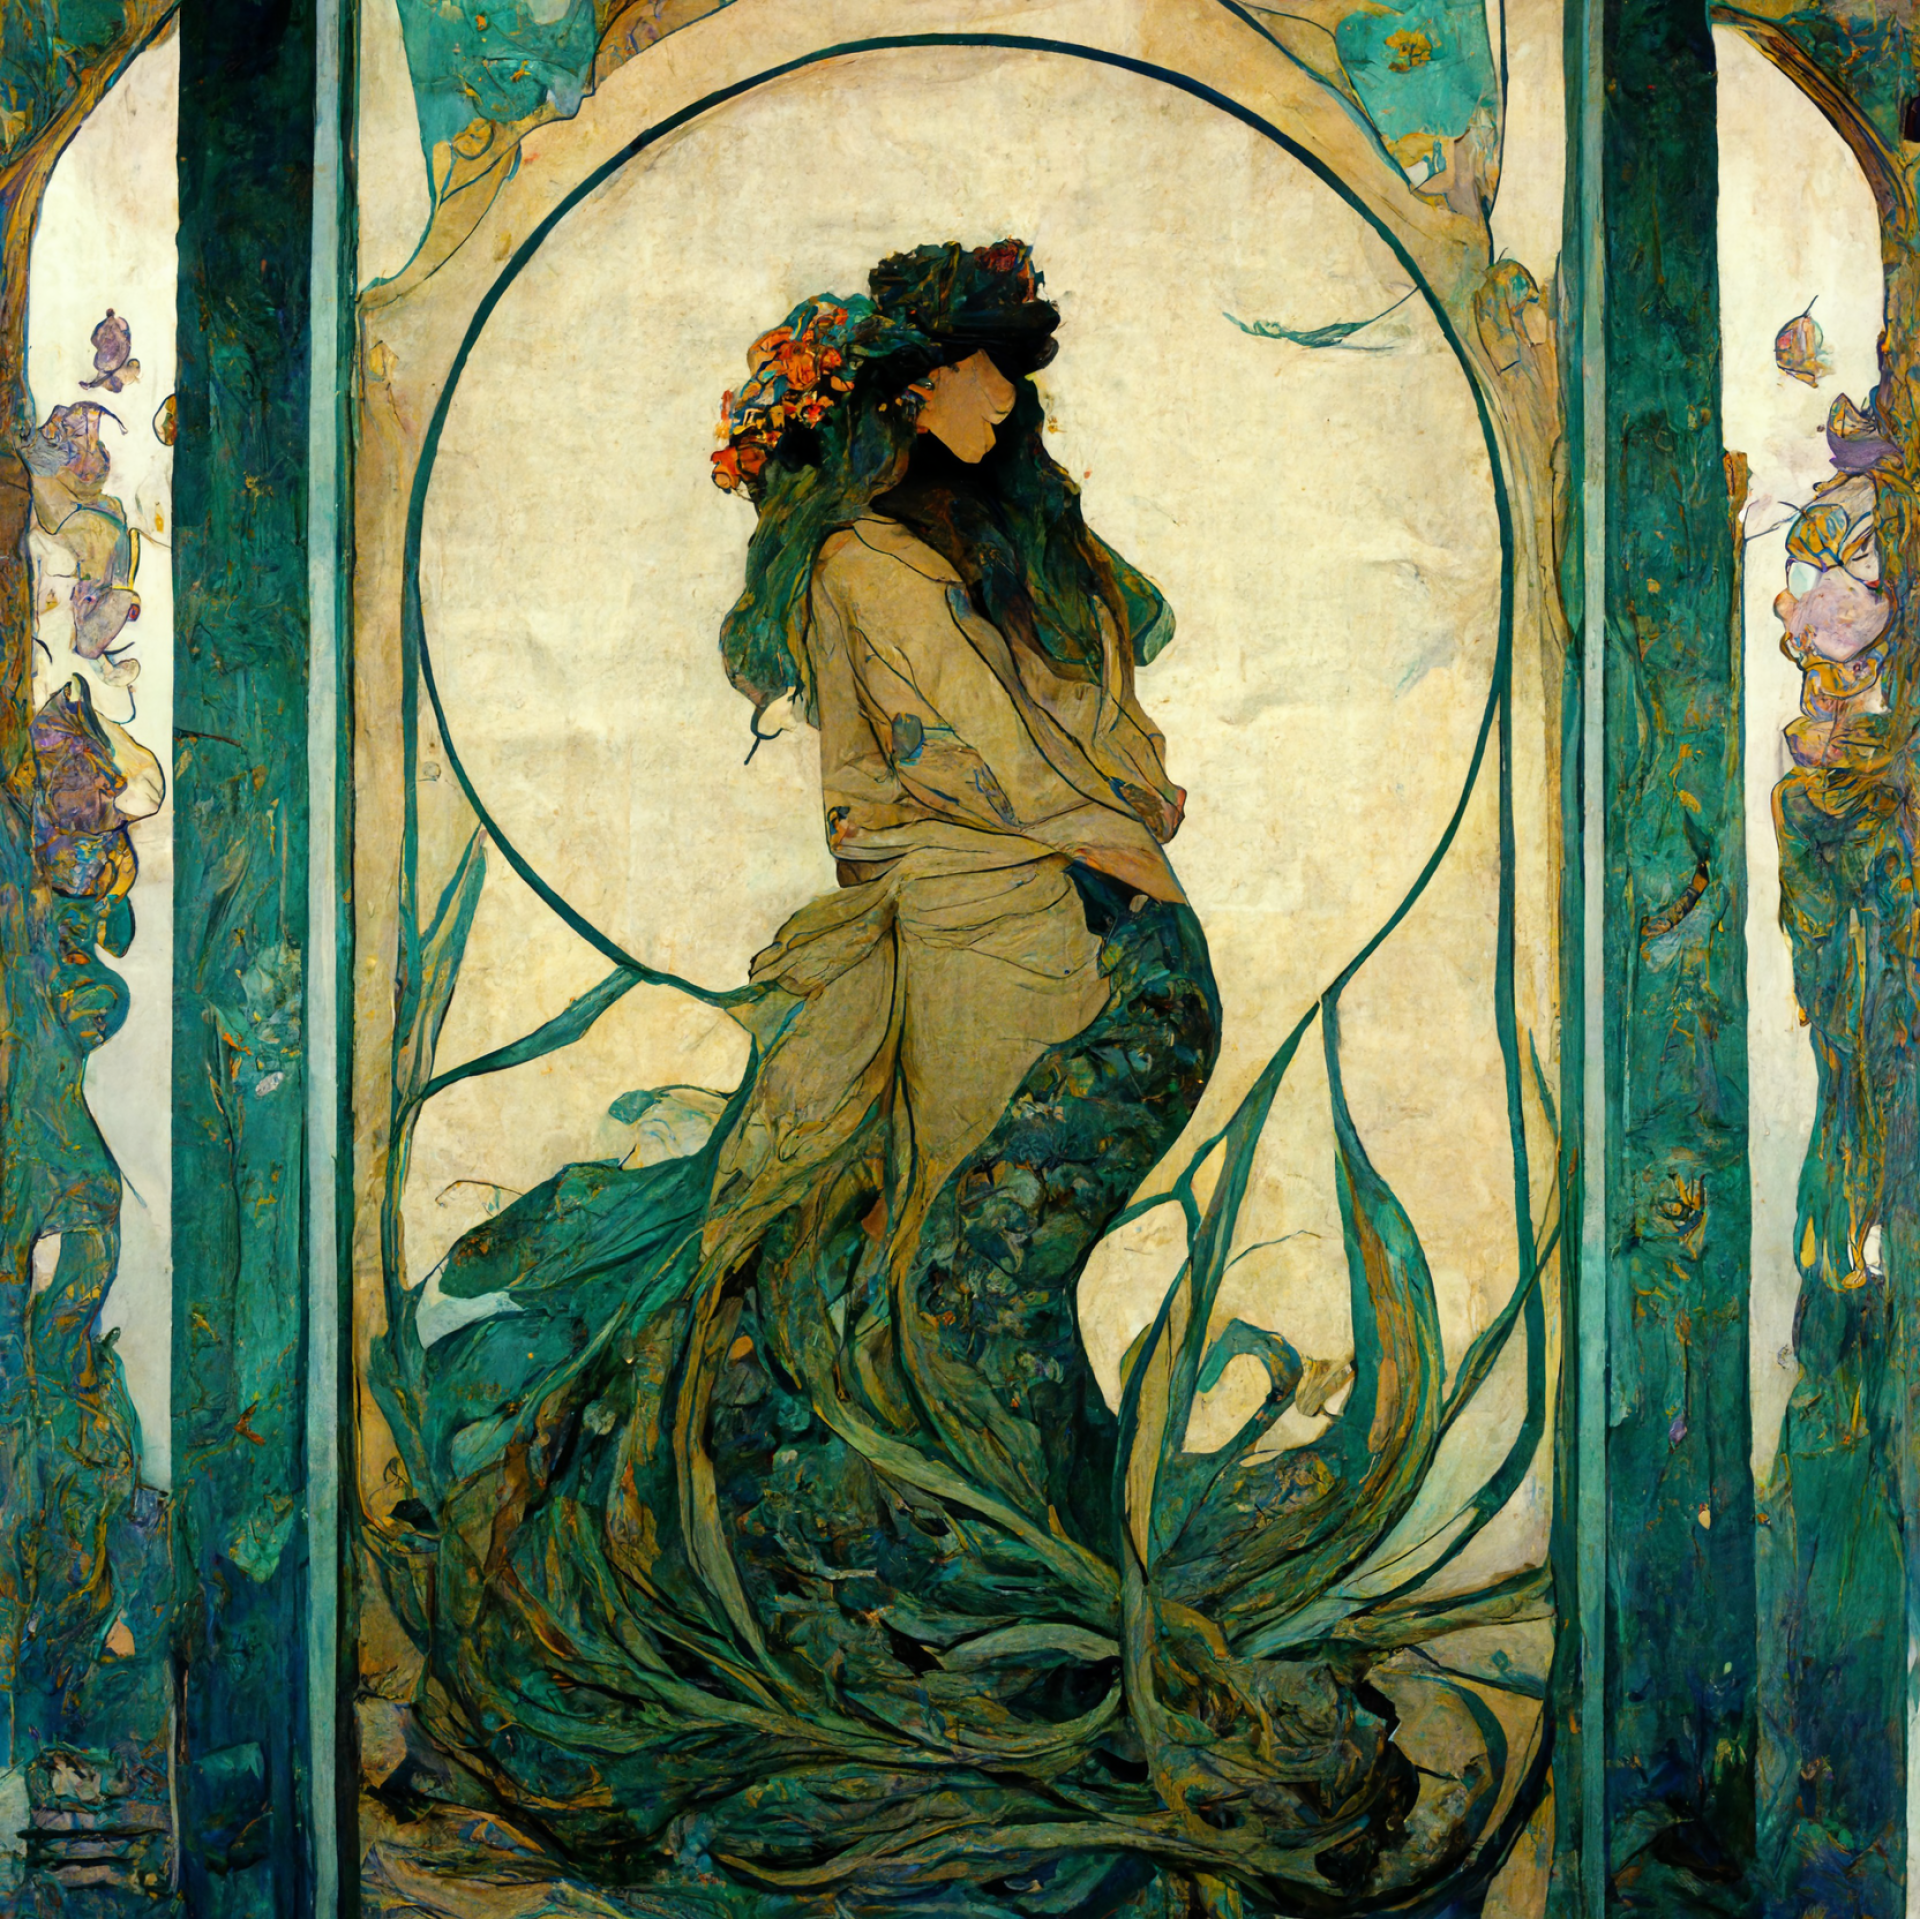 AI-generated image from Midjourney, the Faroe Islands inspired by Alfons Mucha.